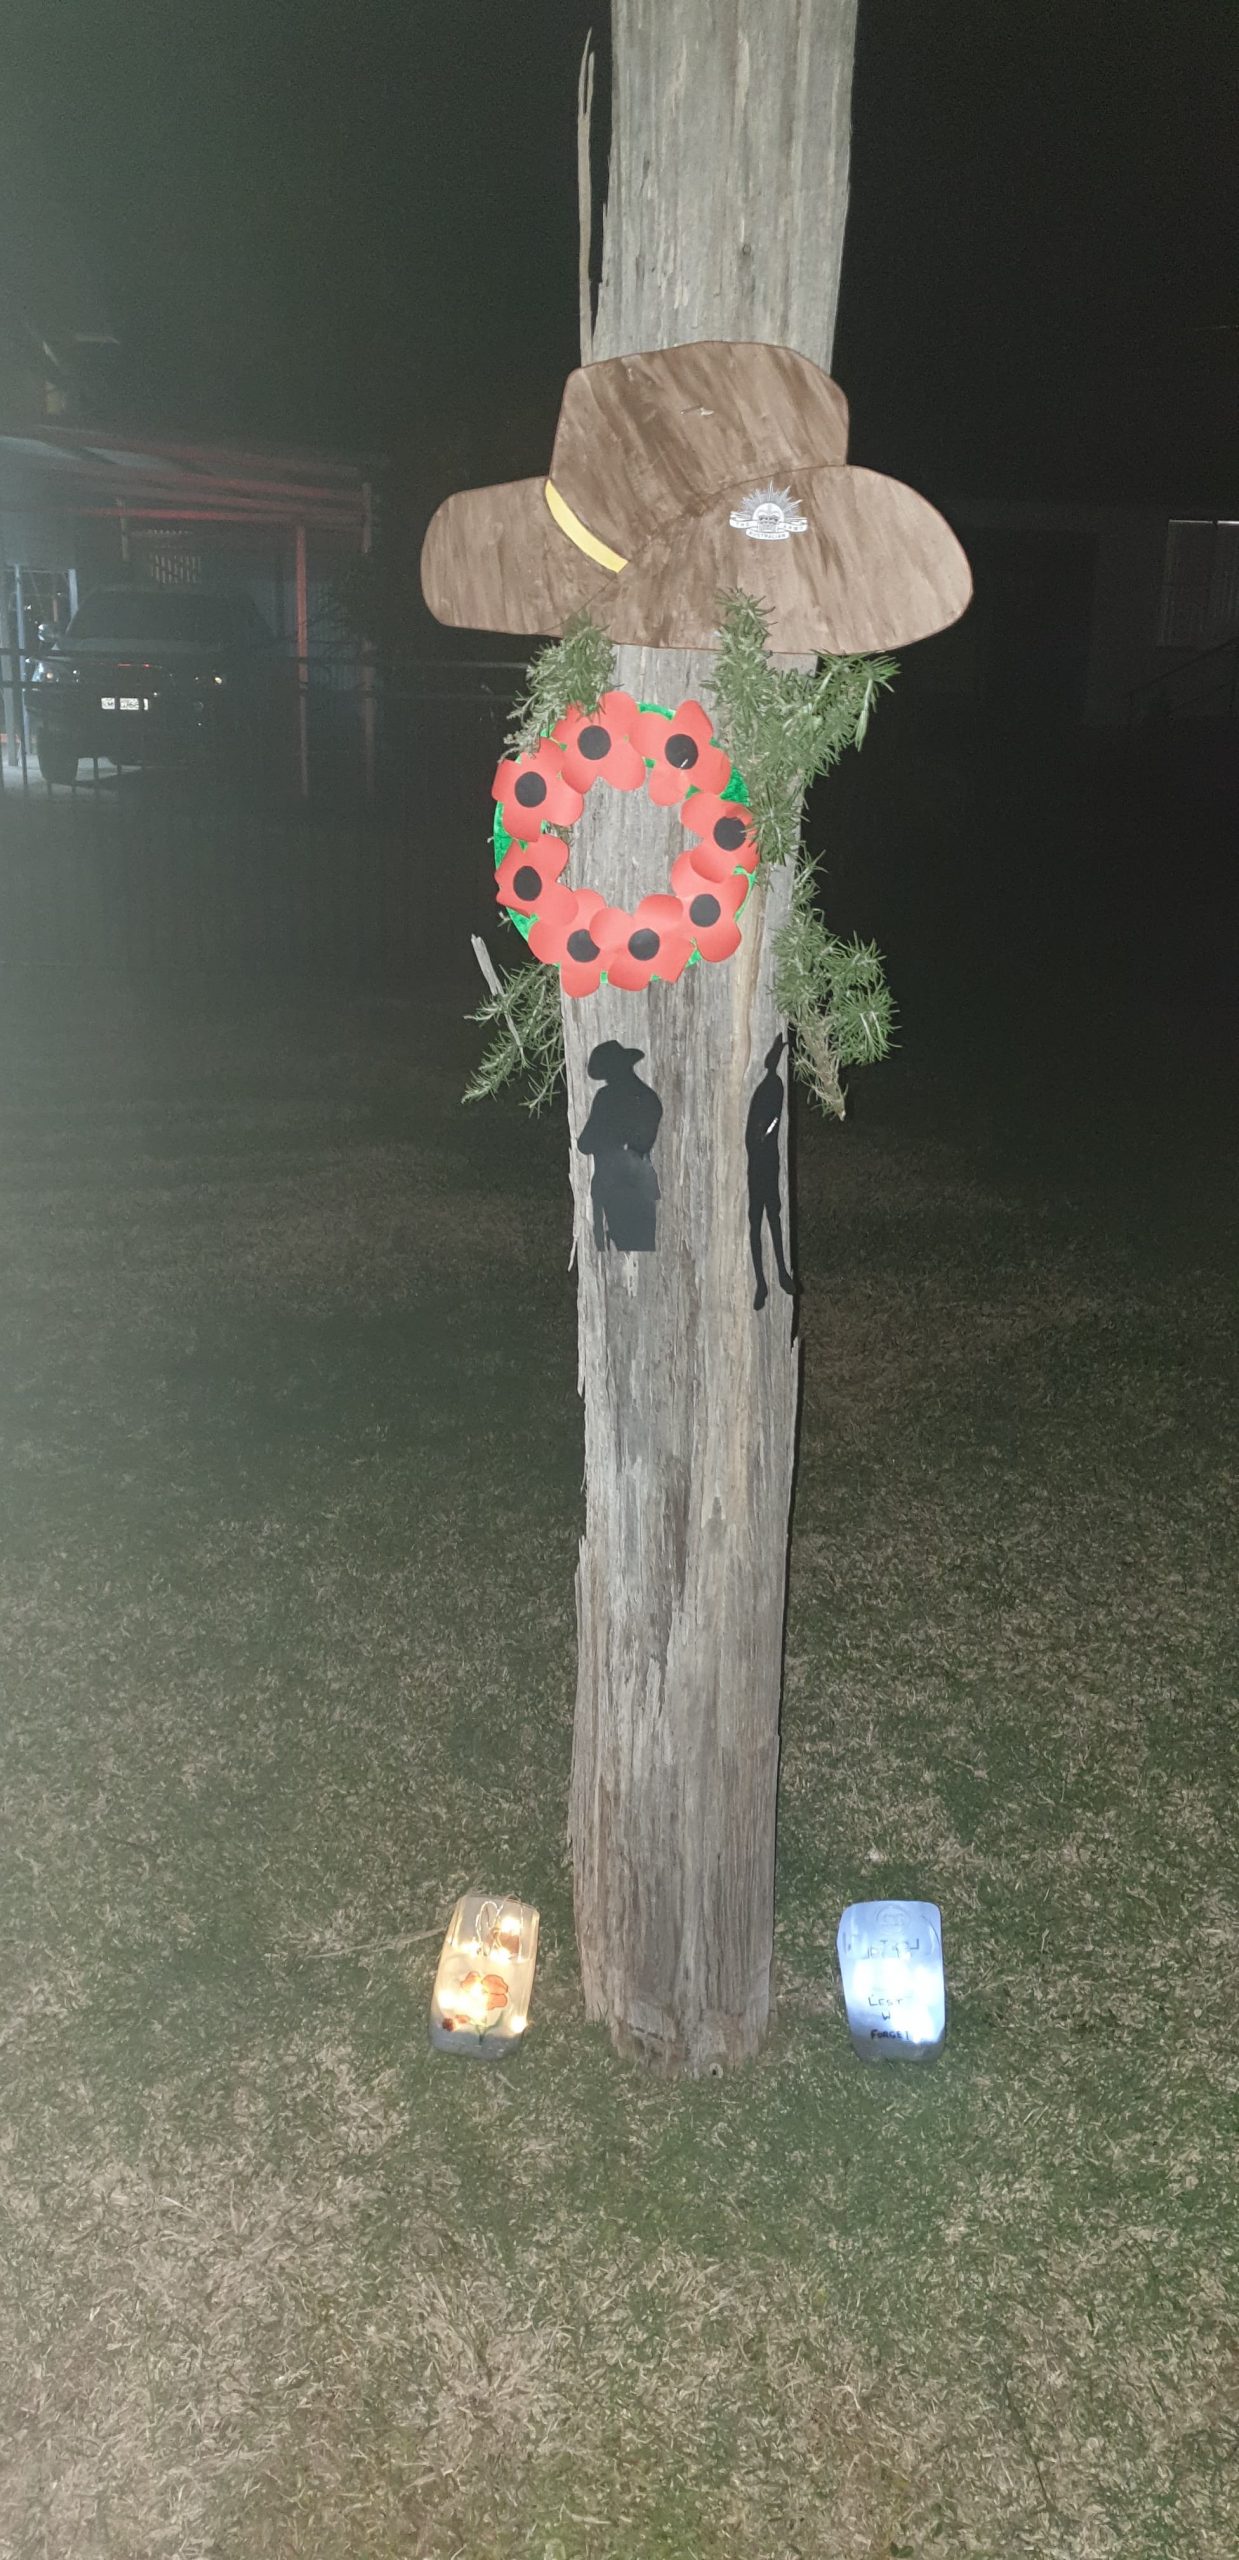 Michelle Gray decorated her front garden to pay tribute to servicemen and women on Anzac Day.